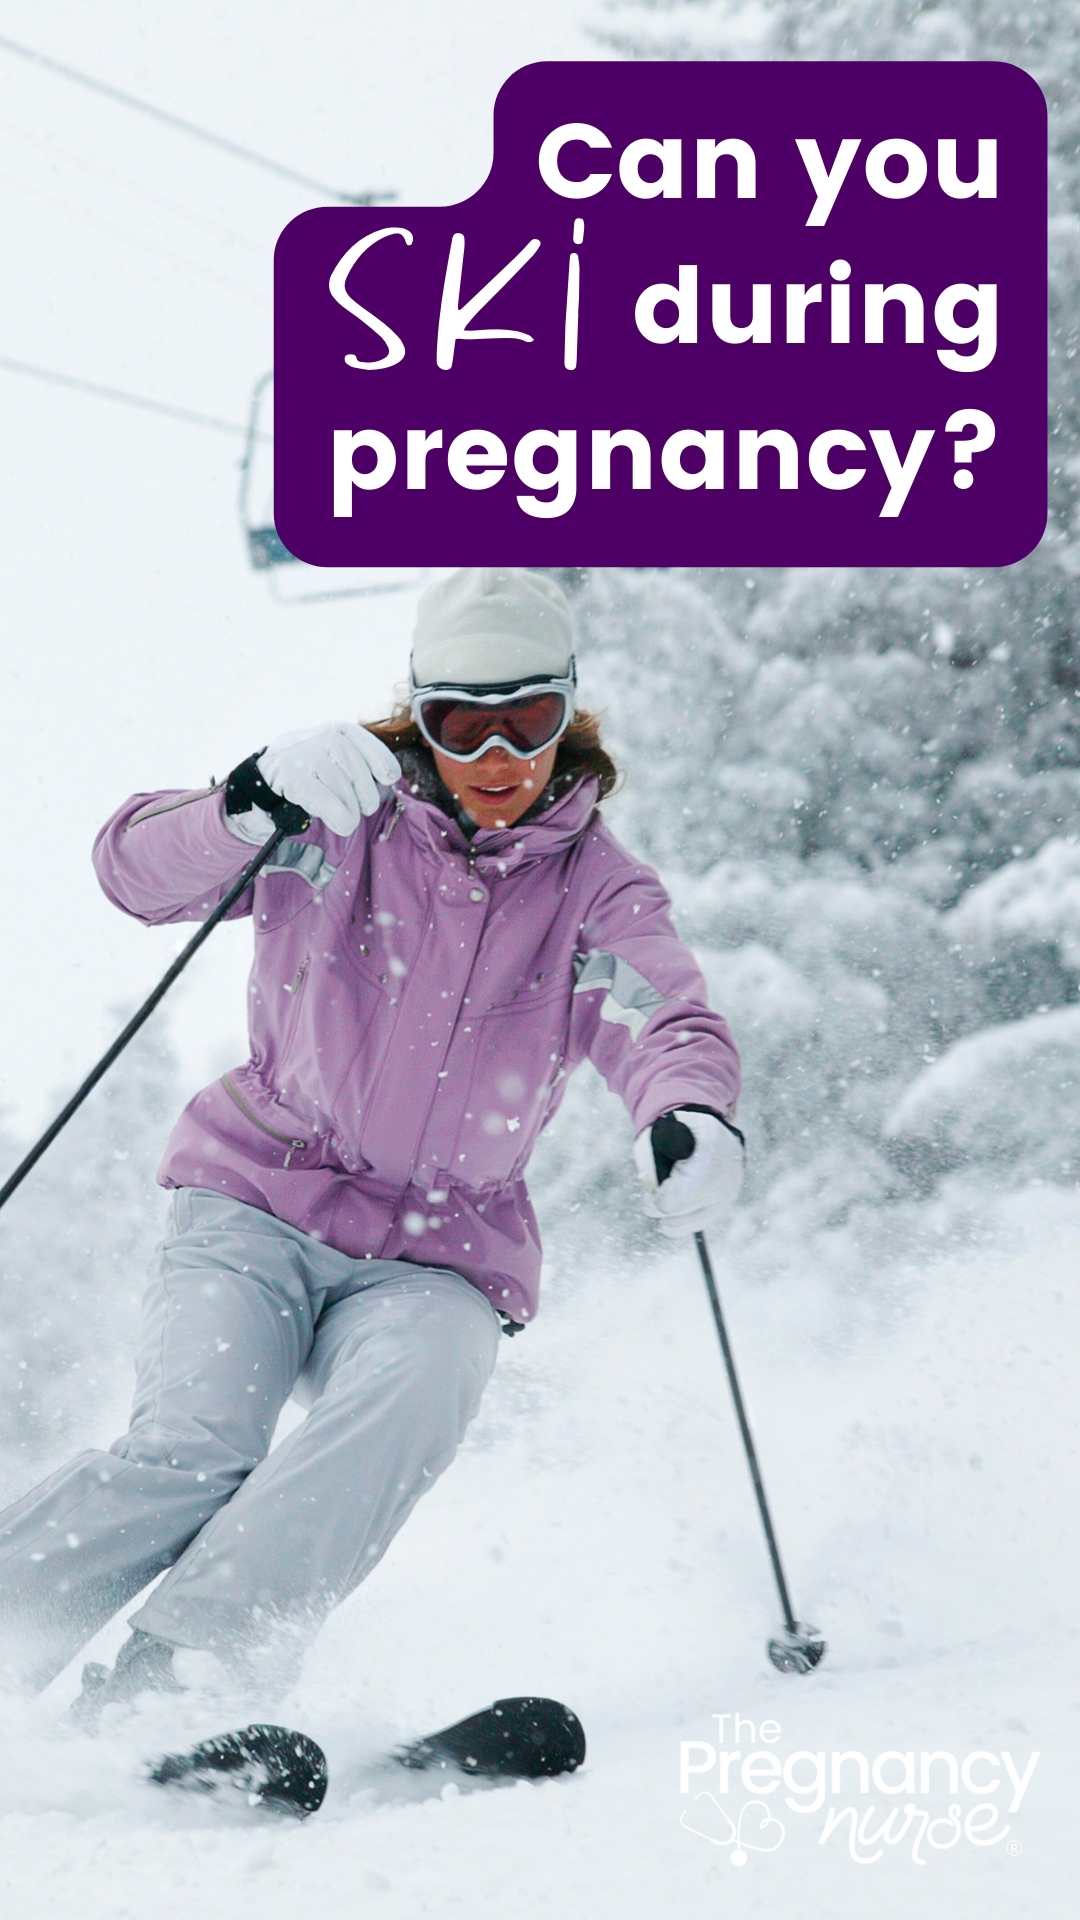 Don't let pregnancy stop you from hitting the slopes! This guide has everything you need to know about skiing while pregnant, including safety tips and advice on what gear to wear.